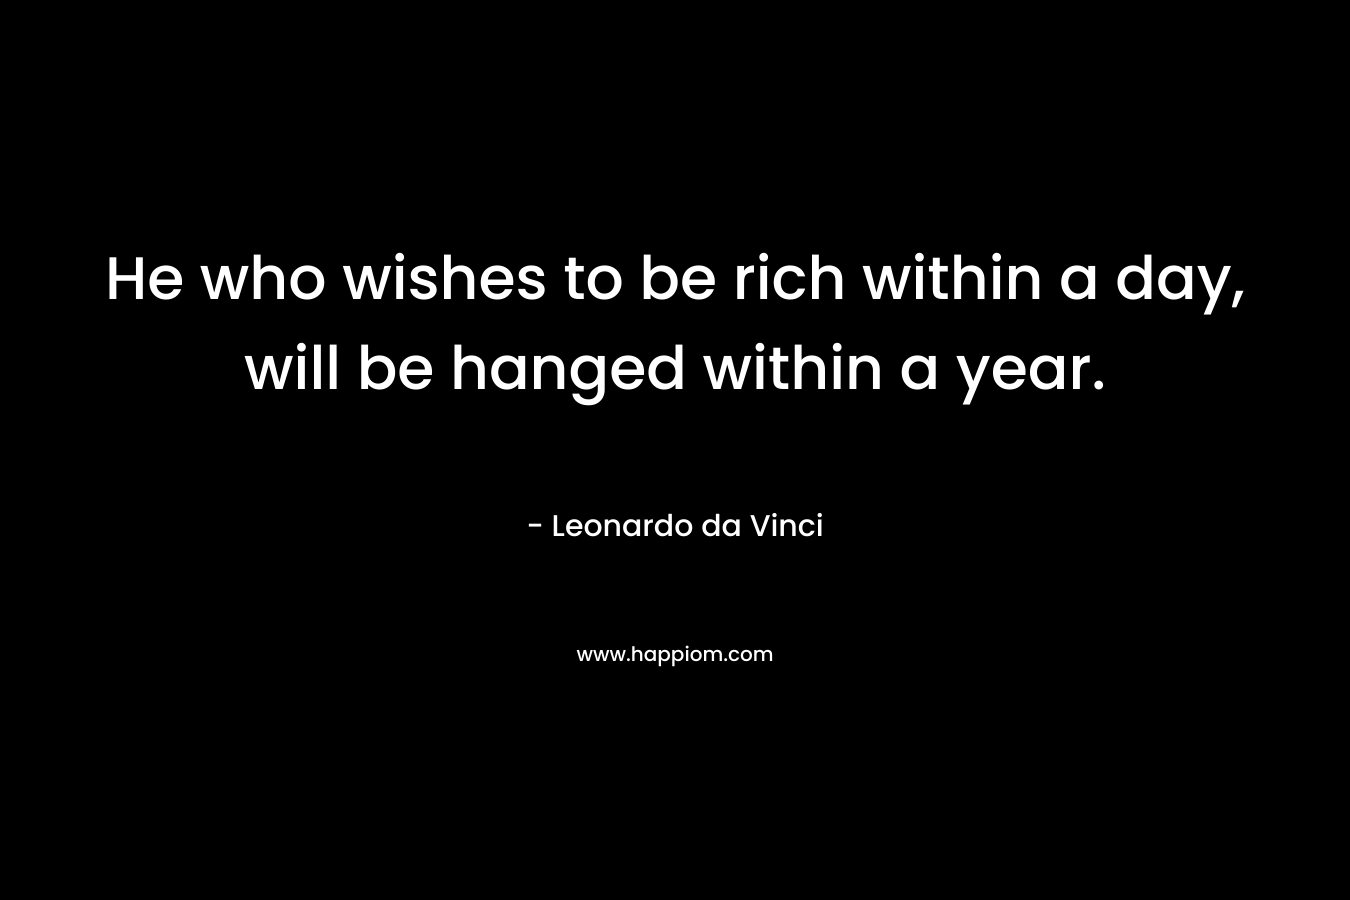 He who wishes to be rich within a day, will be hanged within a year. – Leonardo da Vinci